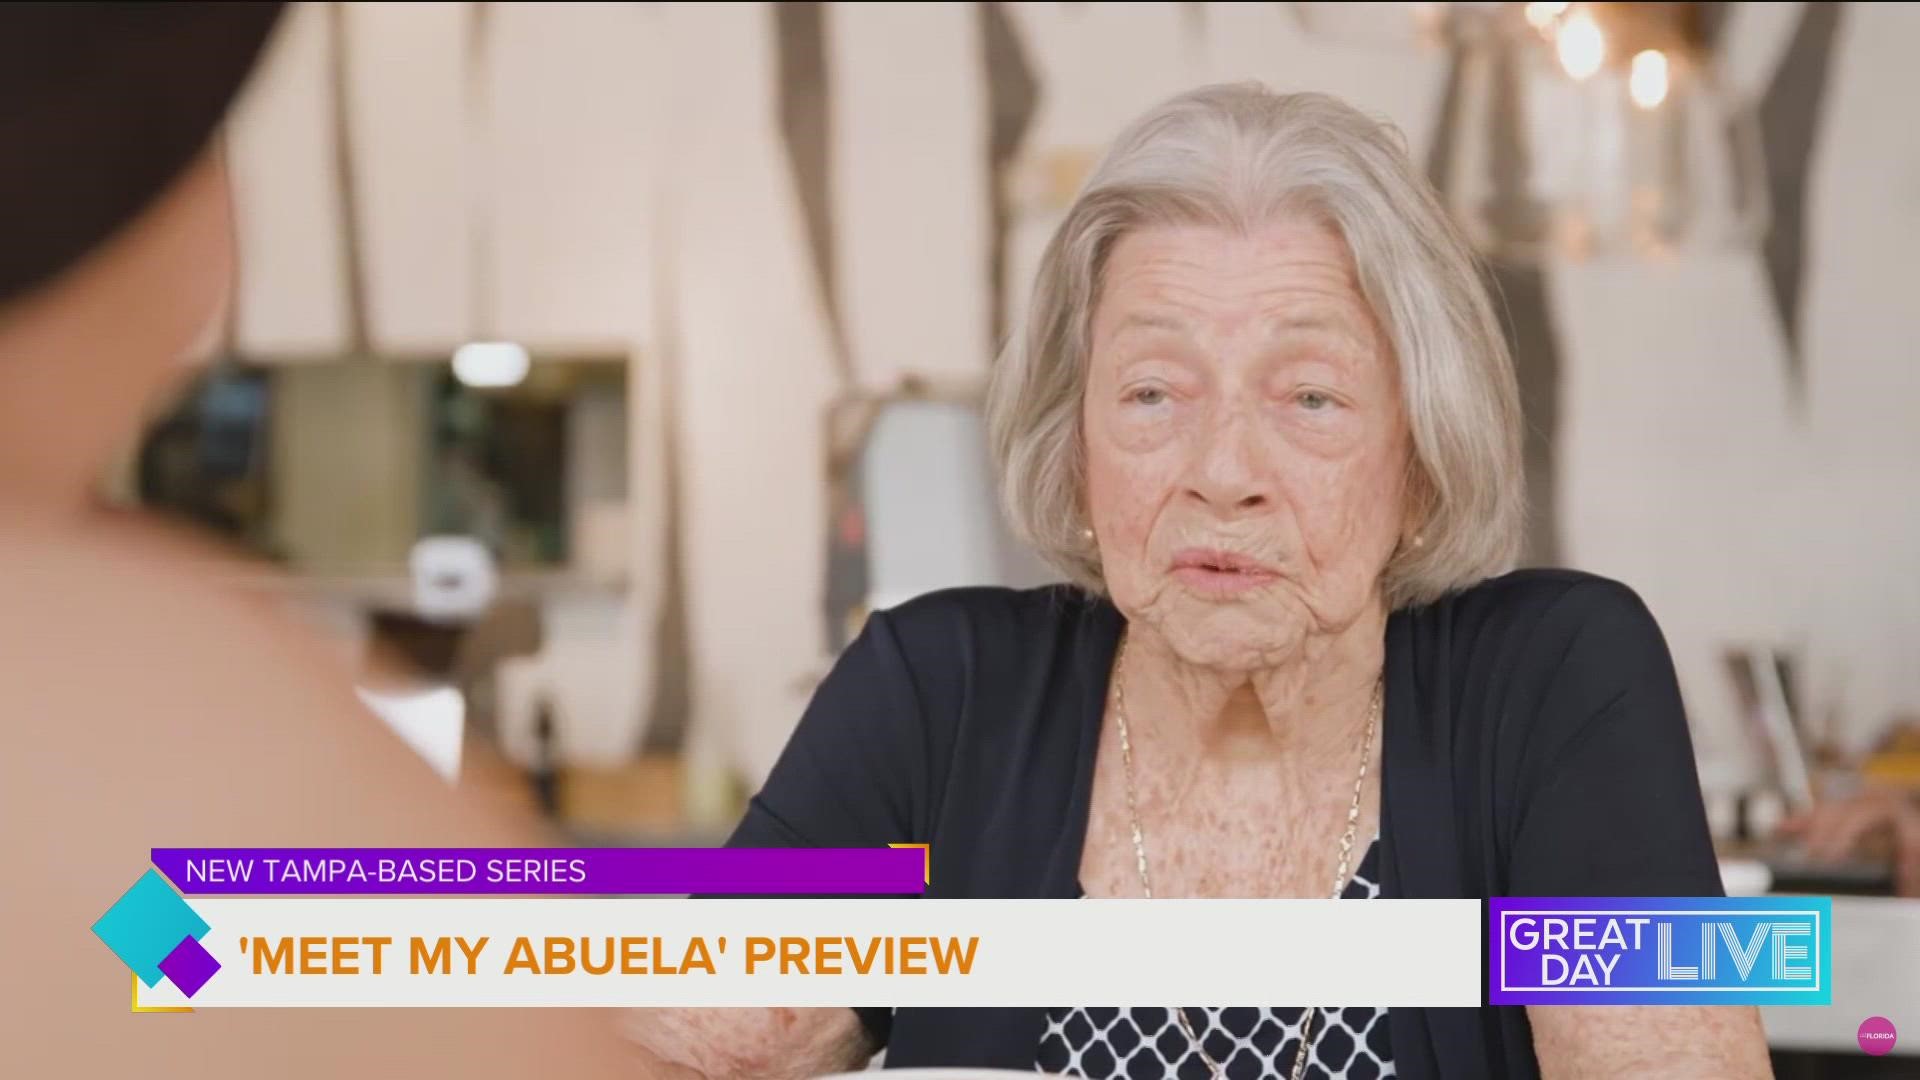 New Series "Meet My Abuela" drops today